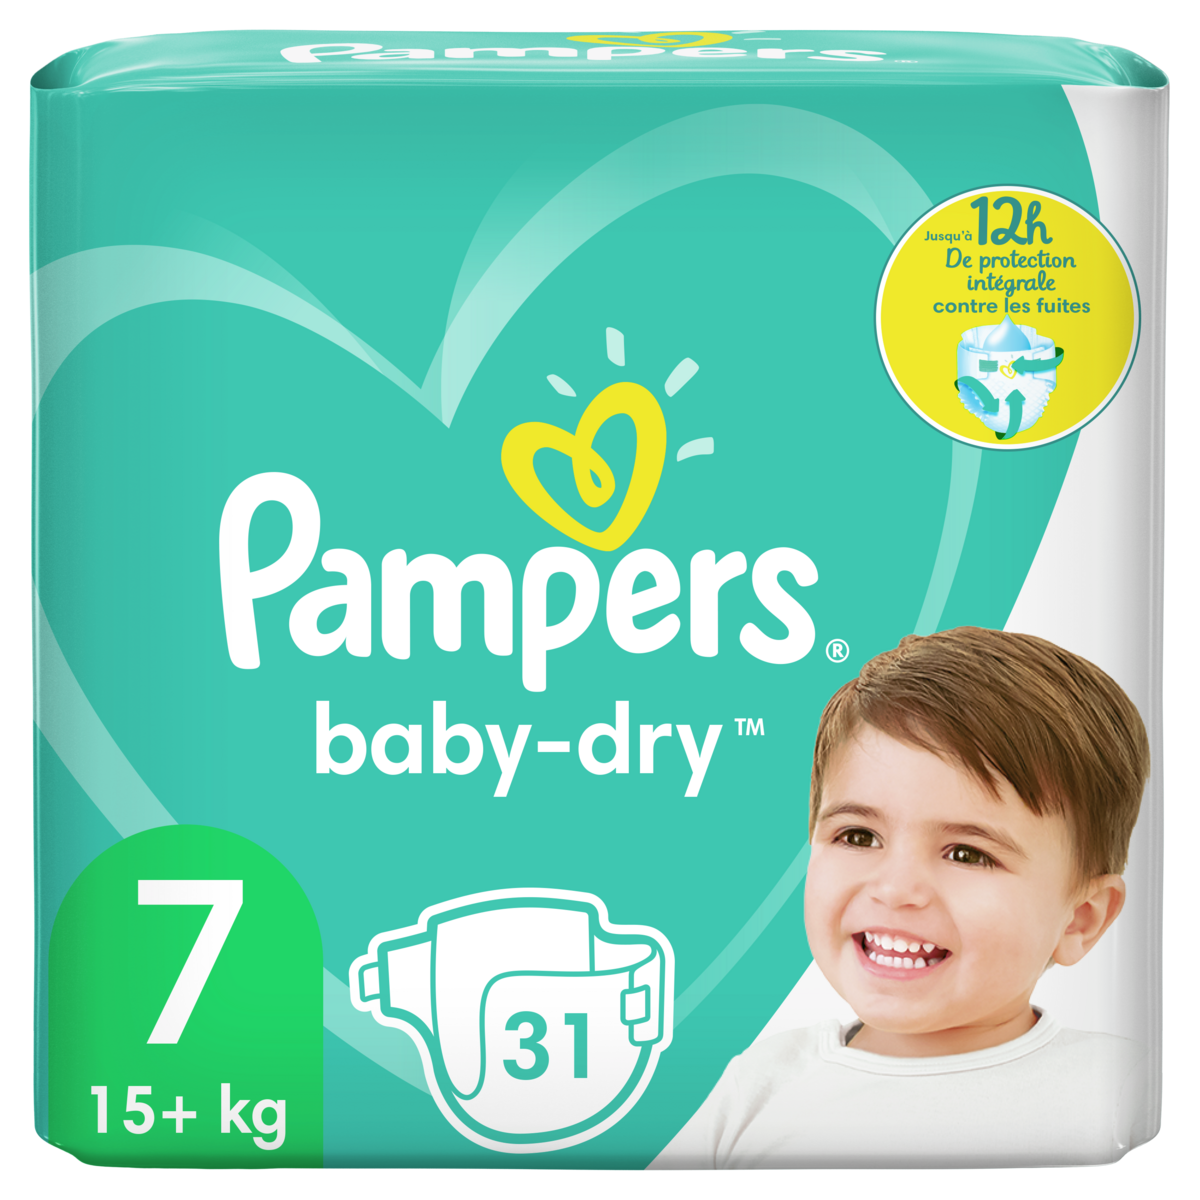 PAMPERS Baby-dry géant couches taille 7 (15kg et +) 31 couches pas